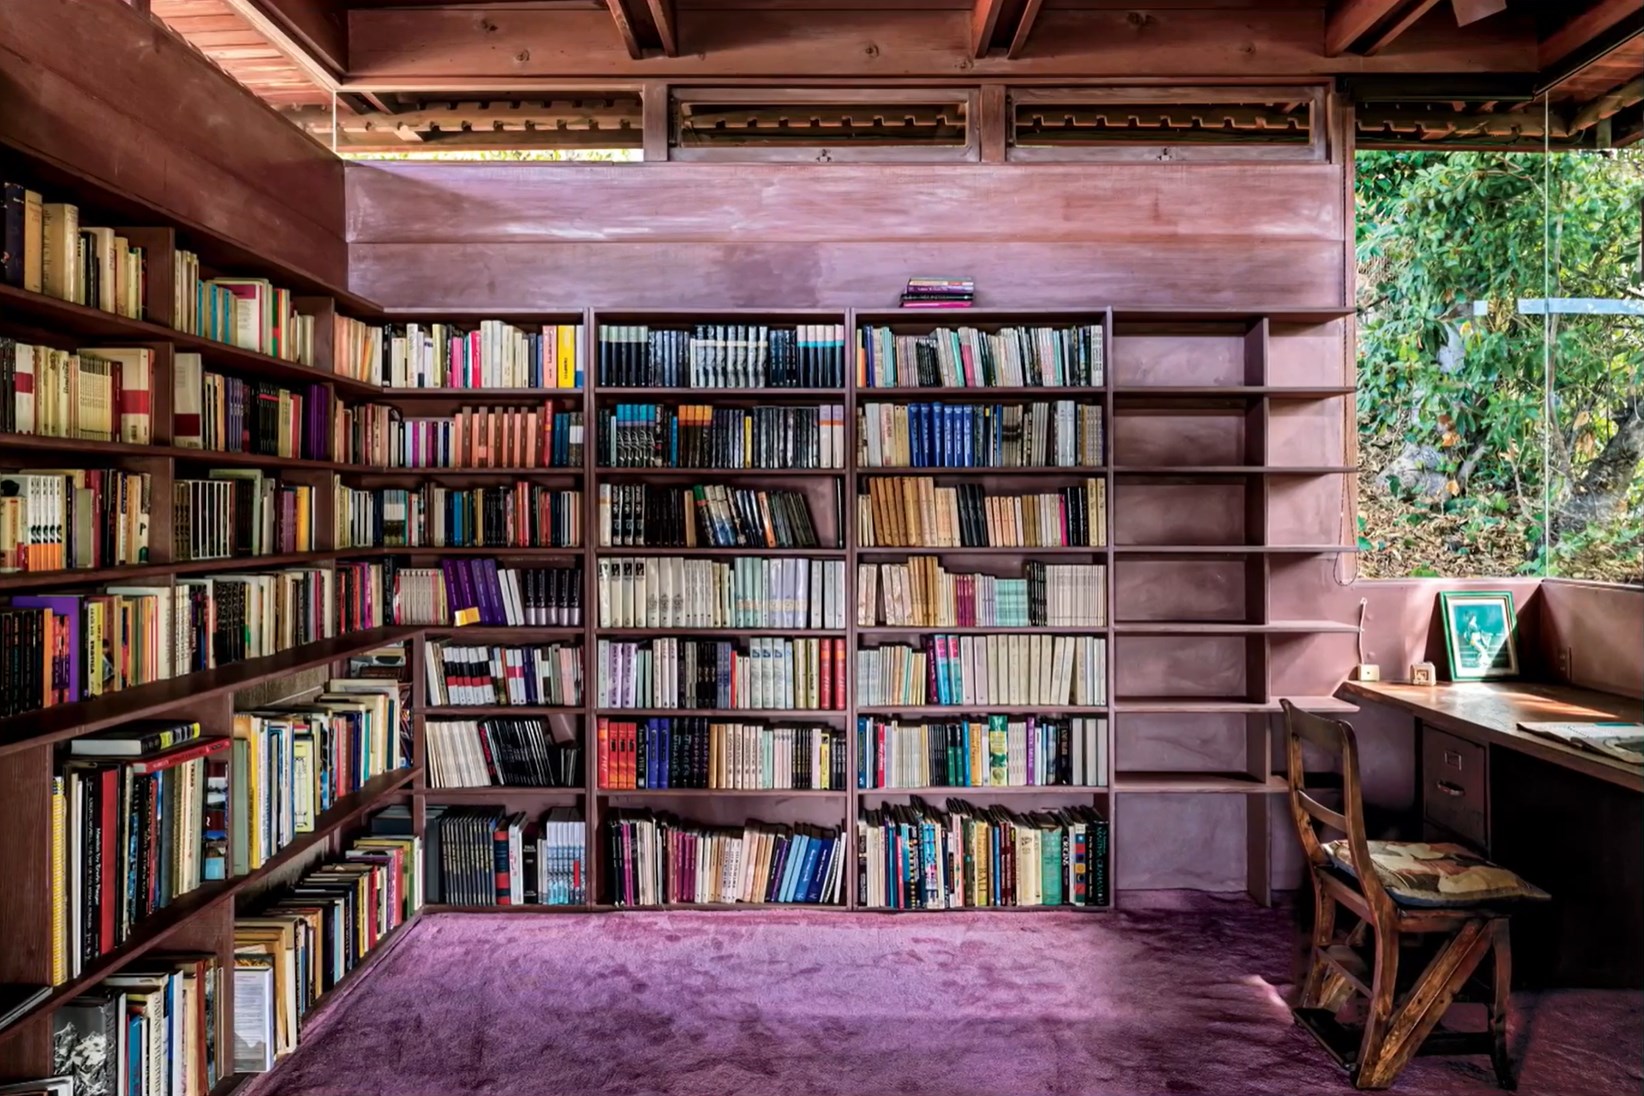 Anaïs Nin's study at her Silver Lake home designed by Eric Lloyd Wright, his first solo project, completed in 1962. Photo: Chris Mottalini.